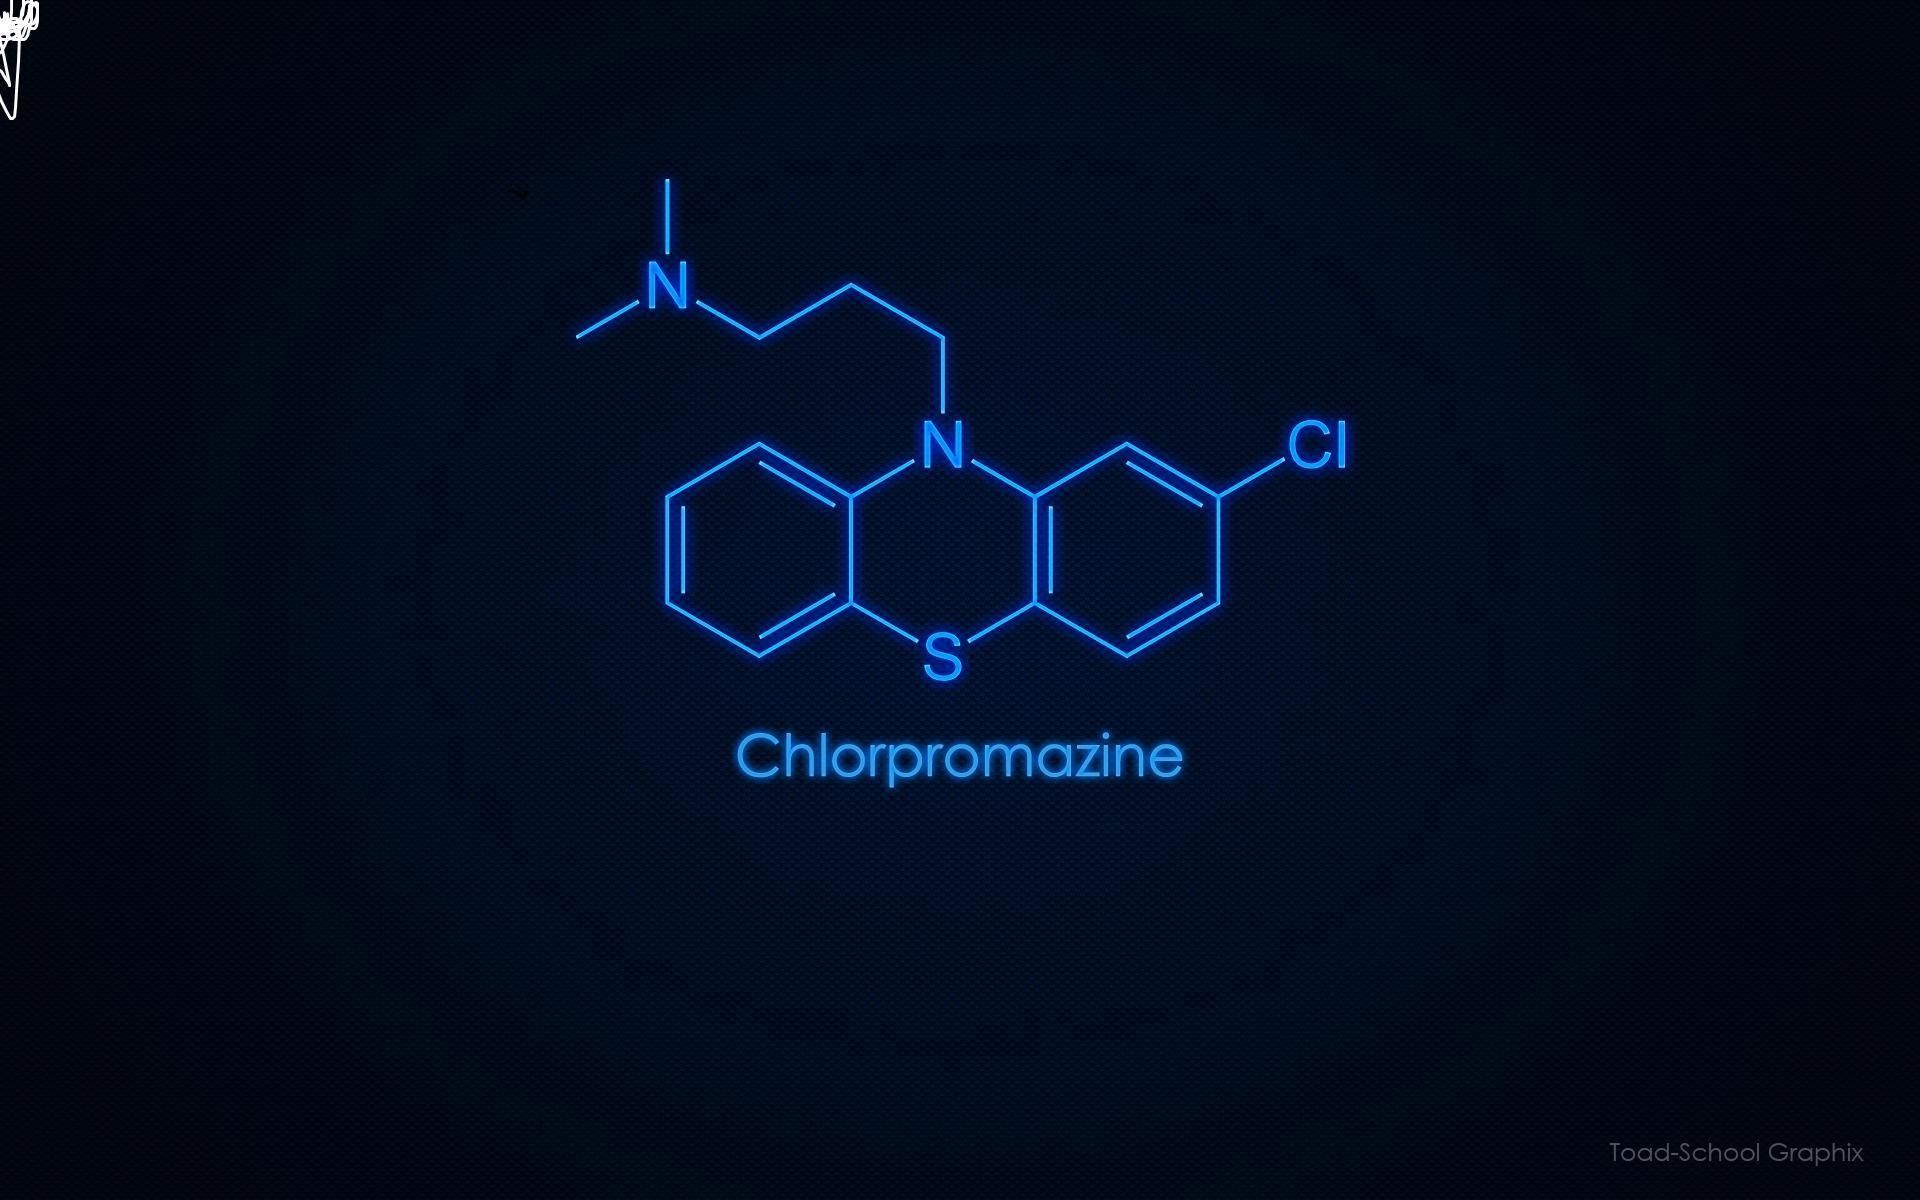 Chlorpromazine is a medication used to treat schizophrenia, bipolar disorder, and other mental illnesses. - Chemistry